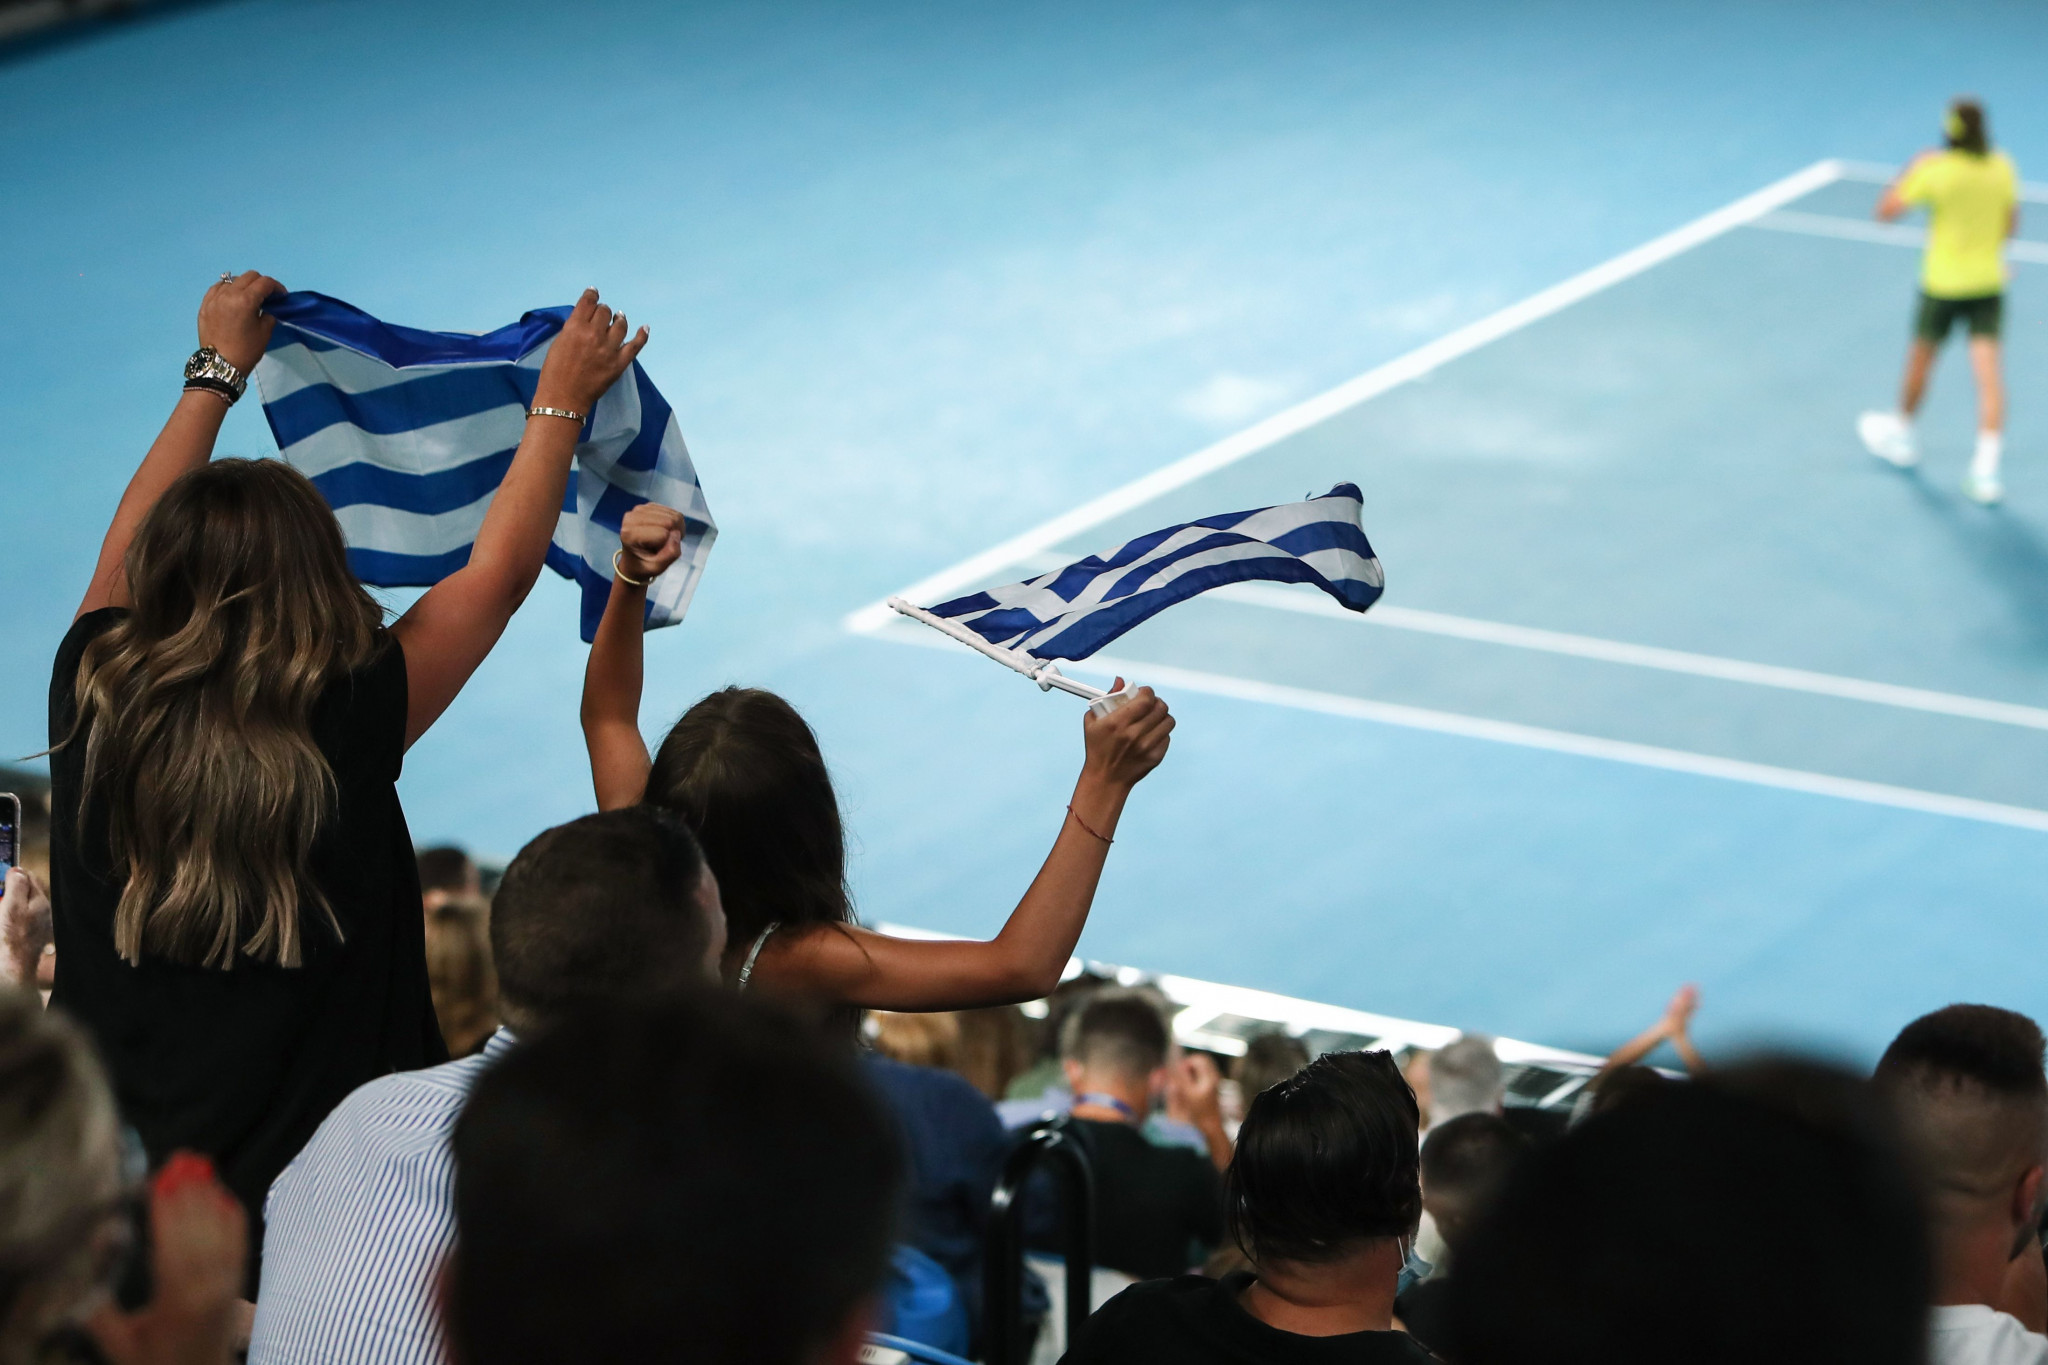 Greece's Stefanos Tsitsipas was well supported in the crowd ©Getty Images